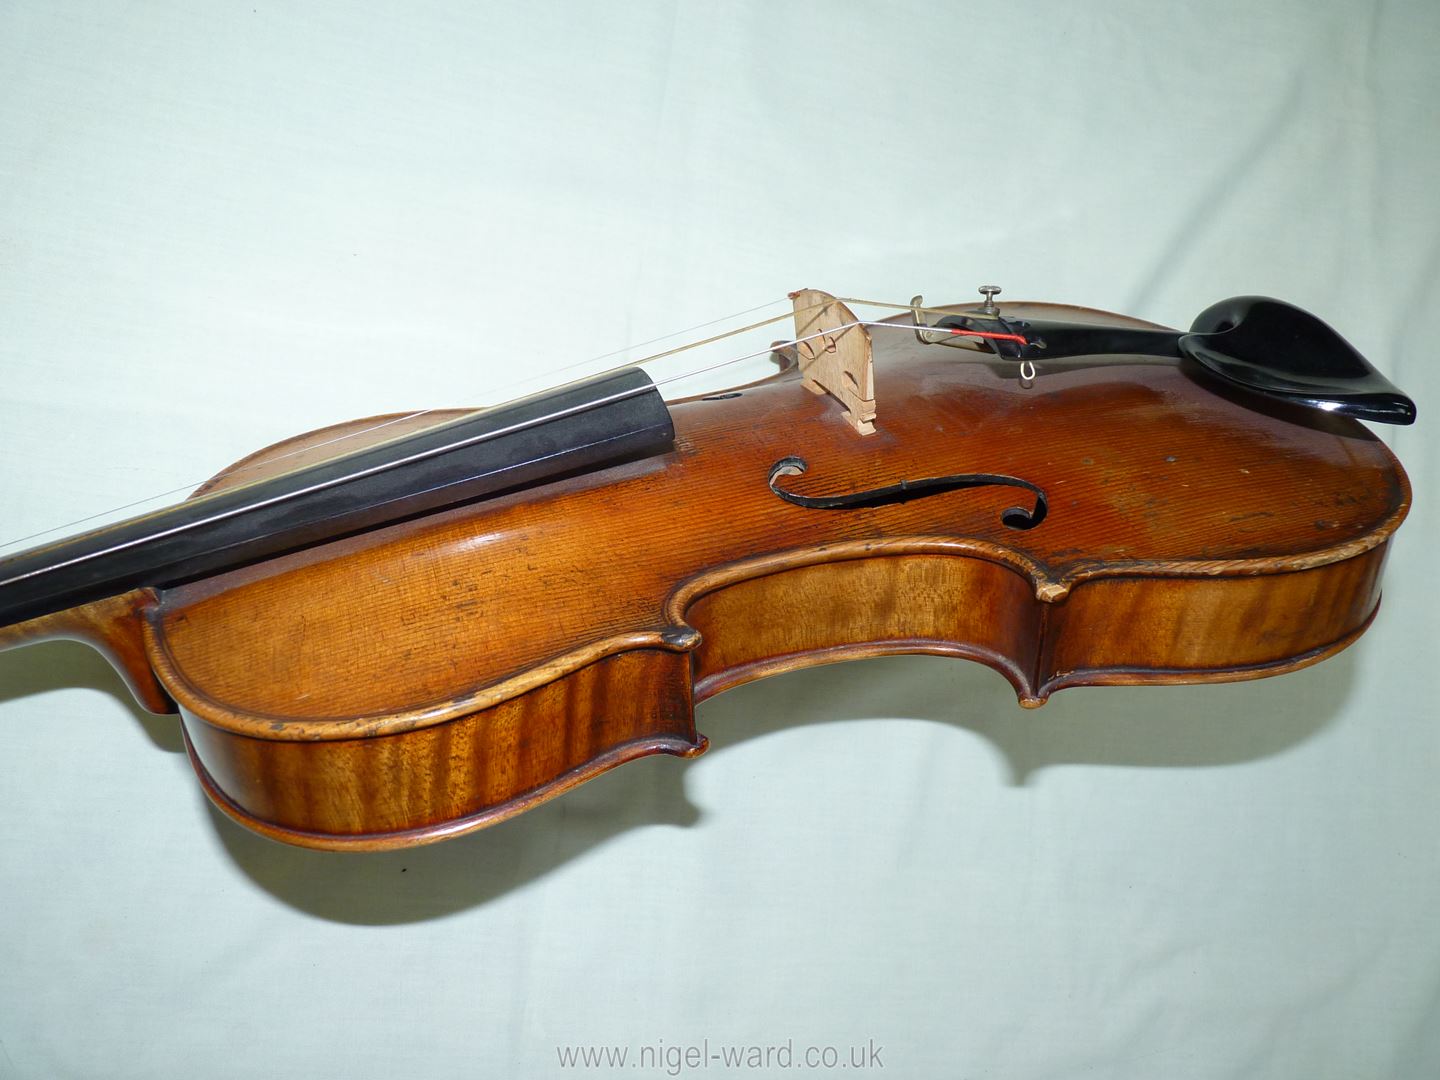 An antique violin having a well-carved scroll and nicely figured body including the back, - Image 16 of 49